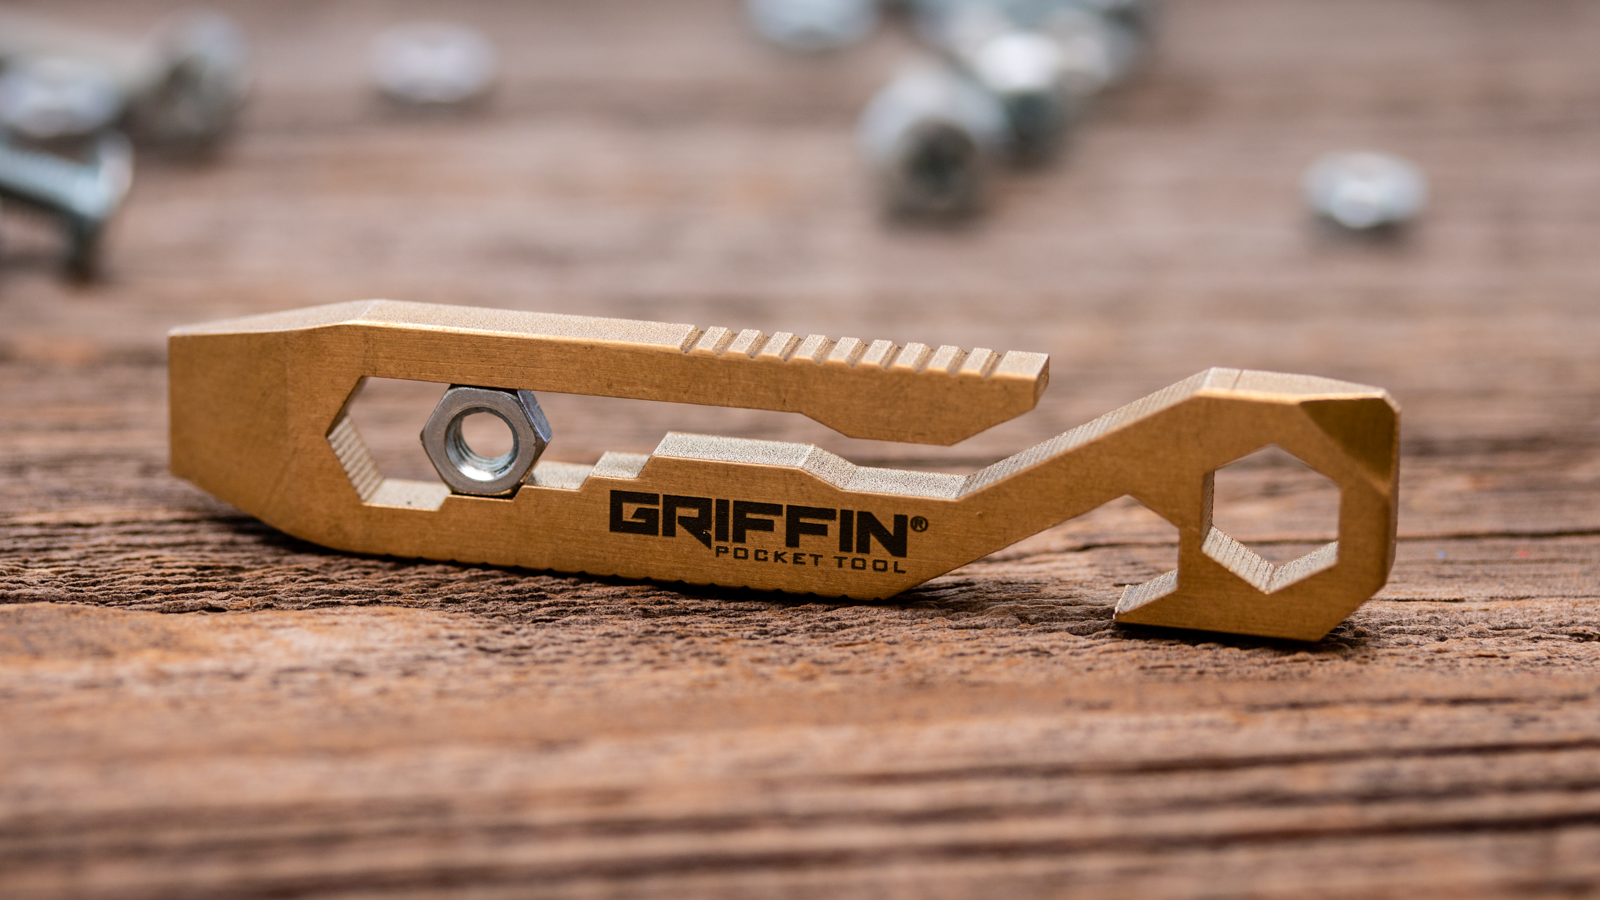 Griffin - Pocket Tool